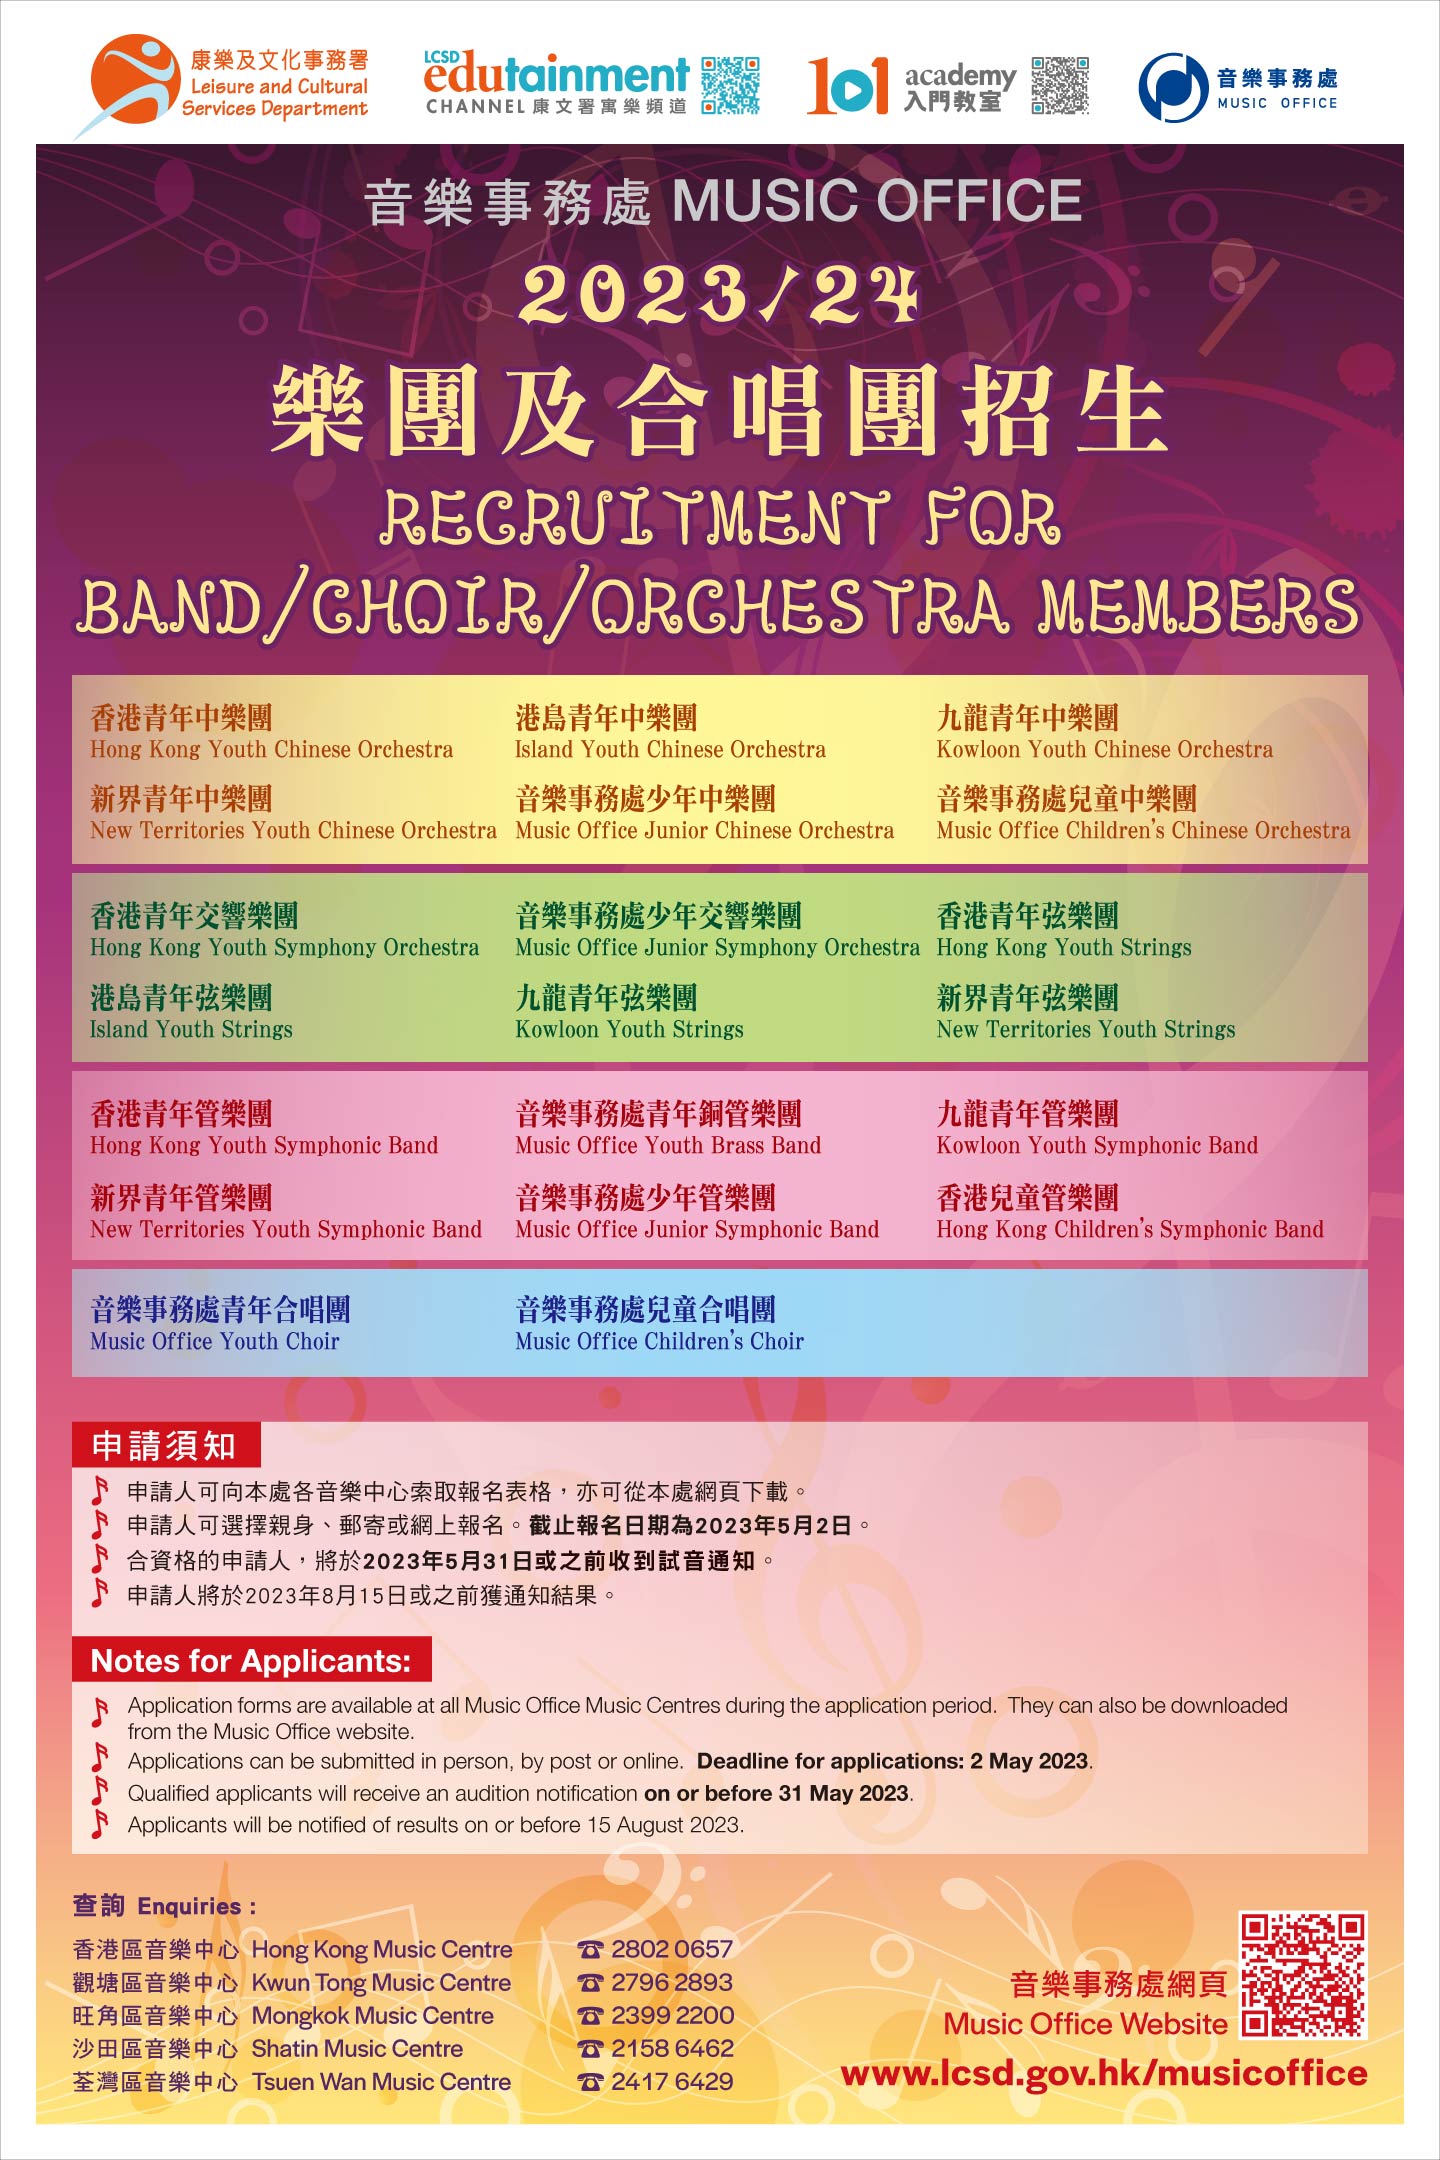 Recruitment for 2023/24 Band/Choir/Orchestra Members